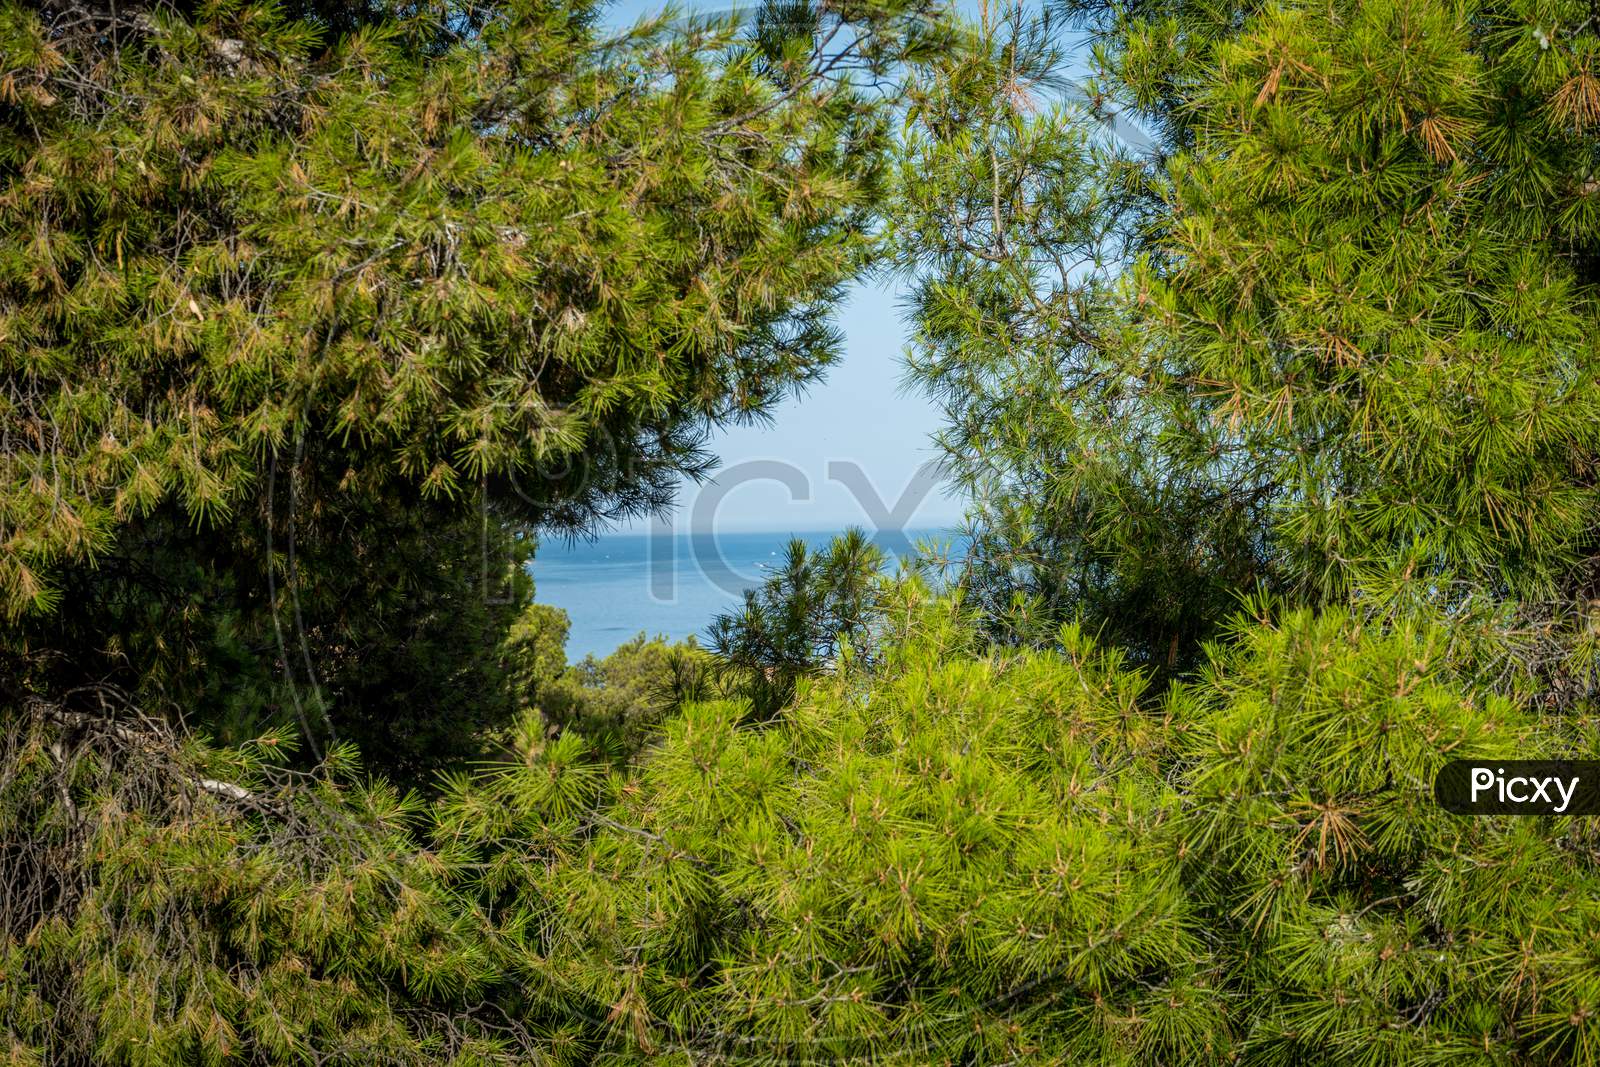 The Sea Viewed Through The Gap Between The Trees In Malaga, Spain, Europe On A Bright Summer Day